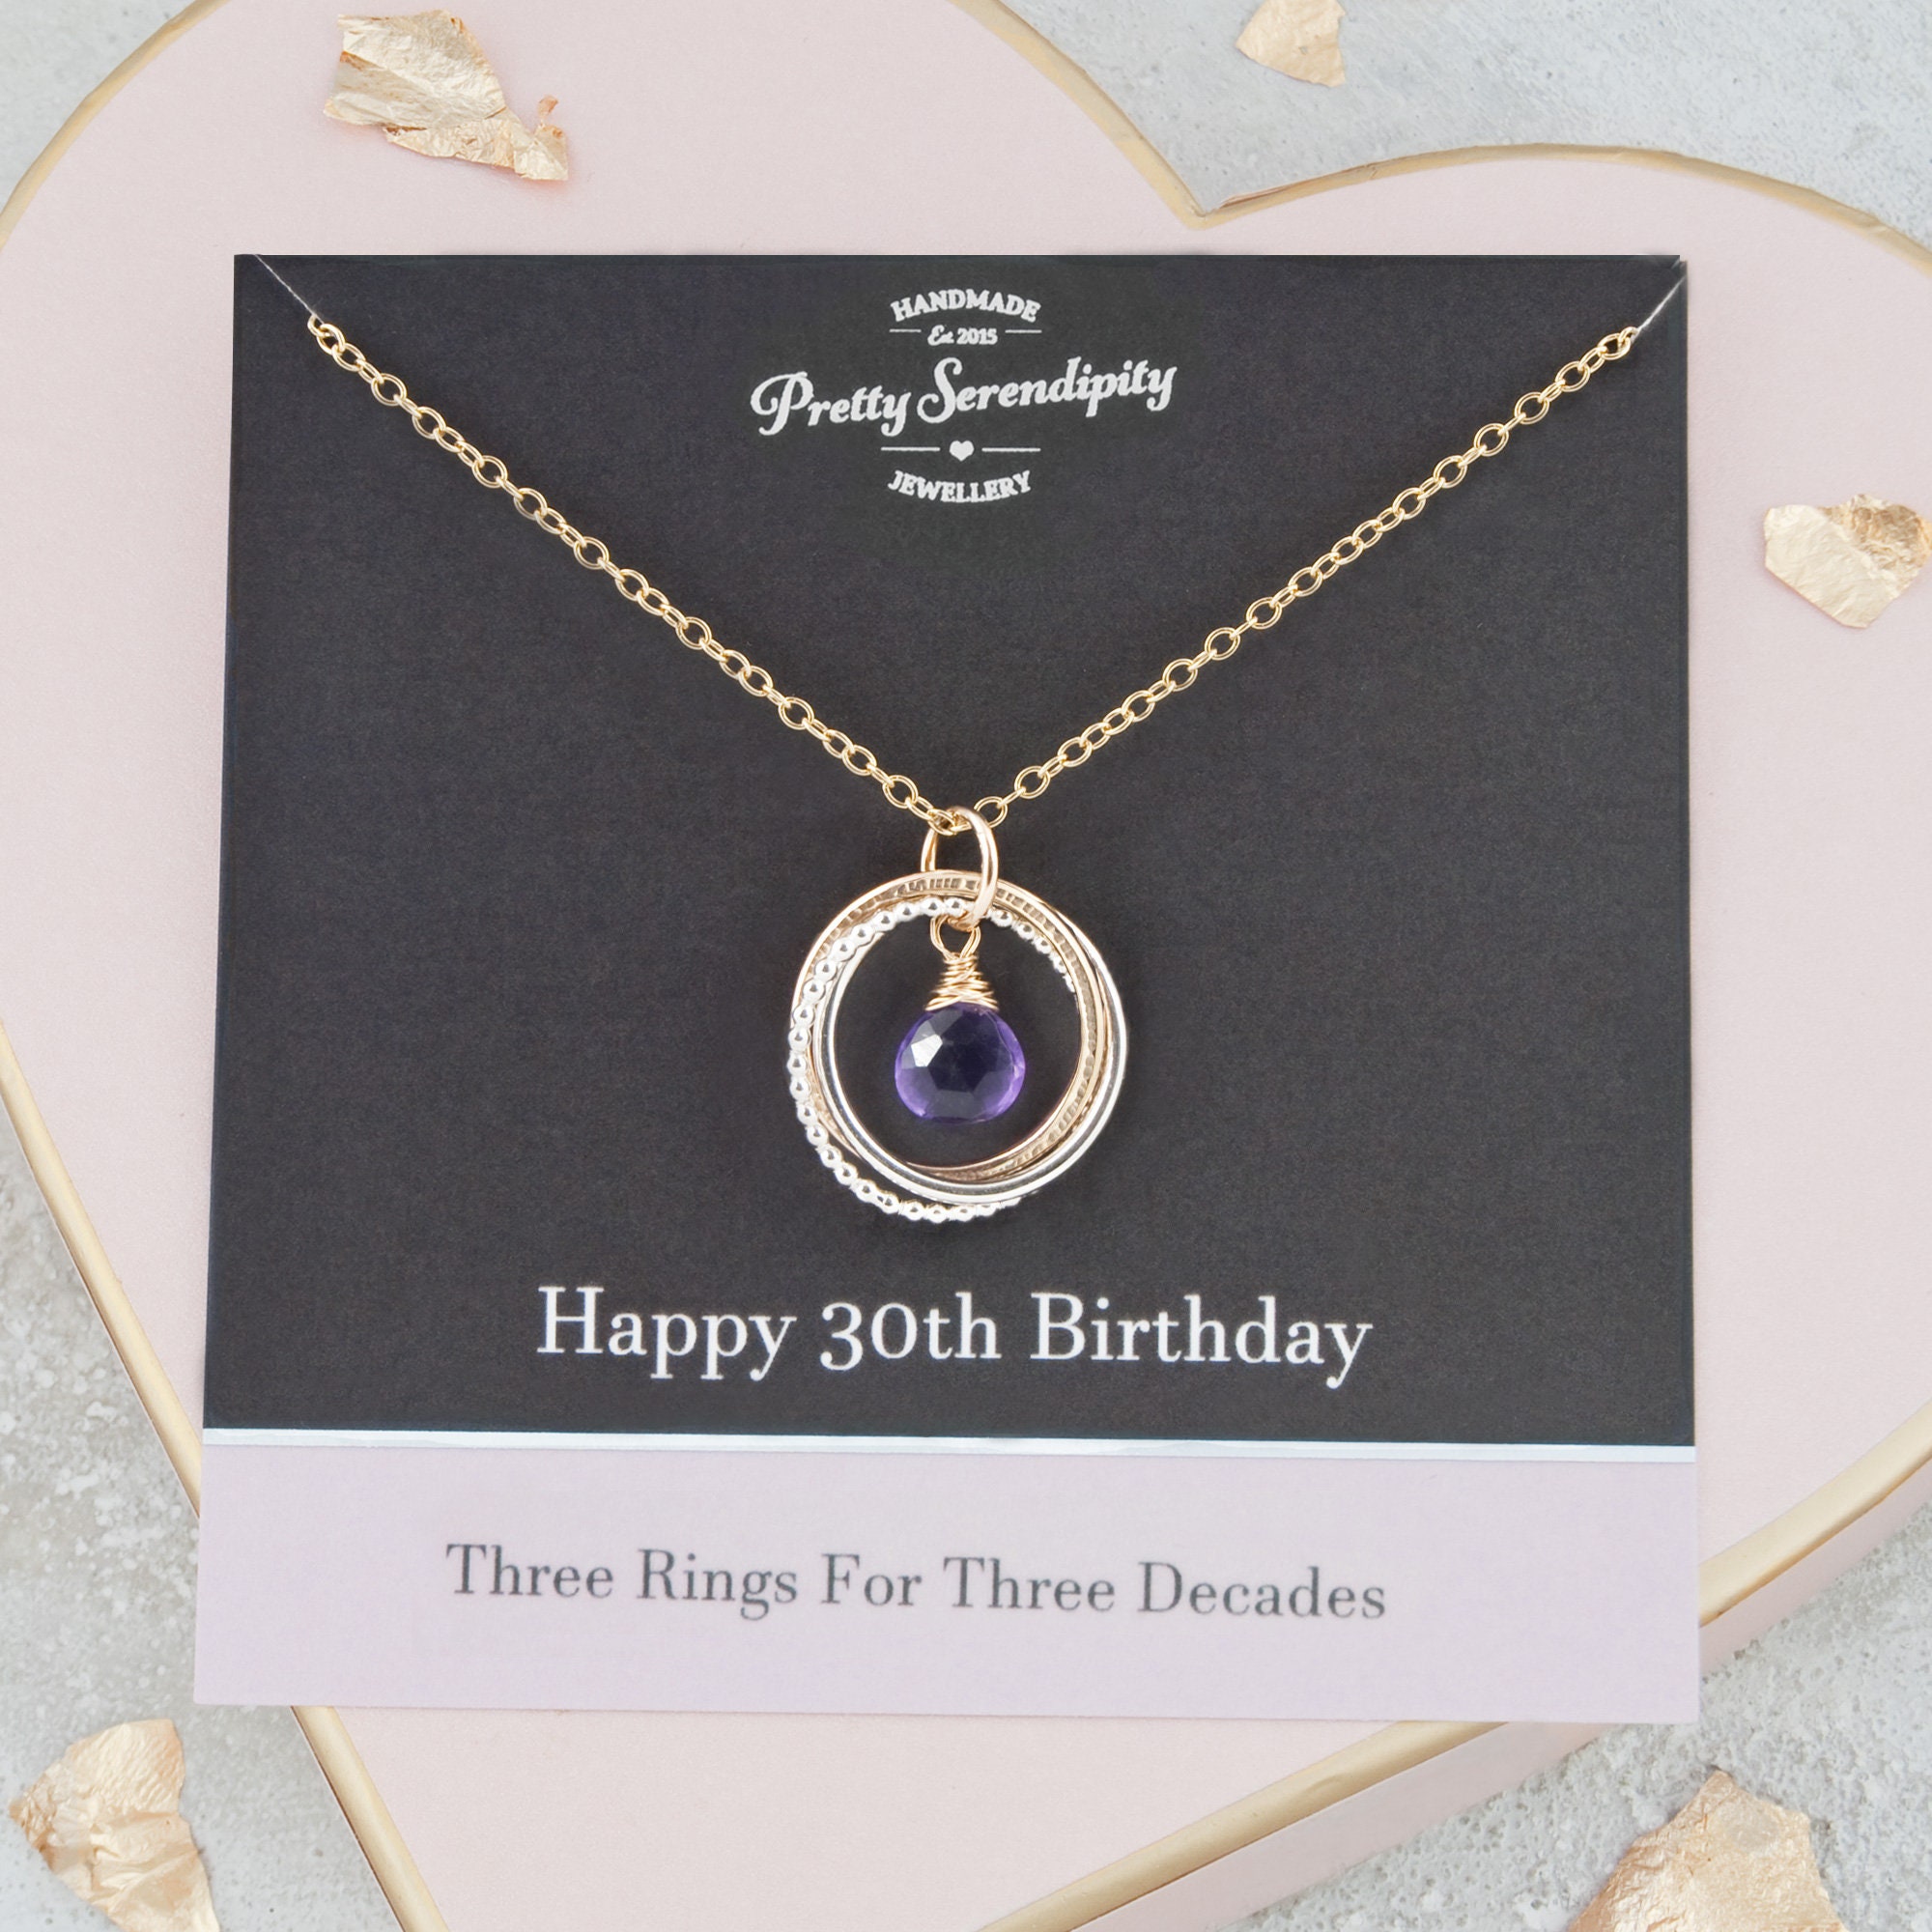 30Th Birthday Mixed Metal Birthstone Necklace - 3 Rings For Decades Gifts Her Silver & 14Ct Gold Fill